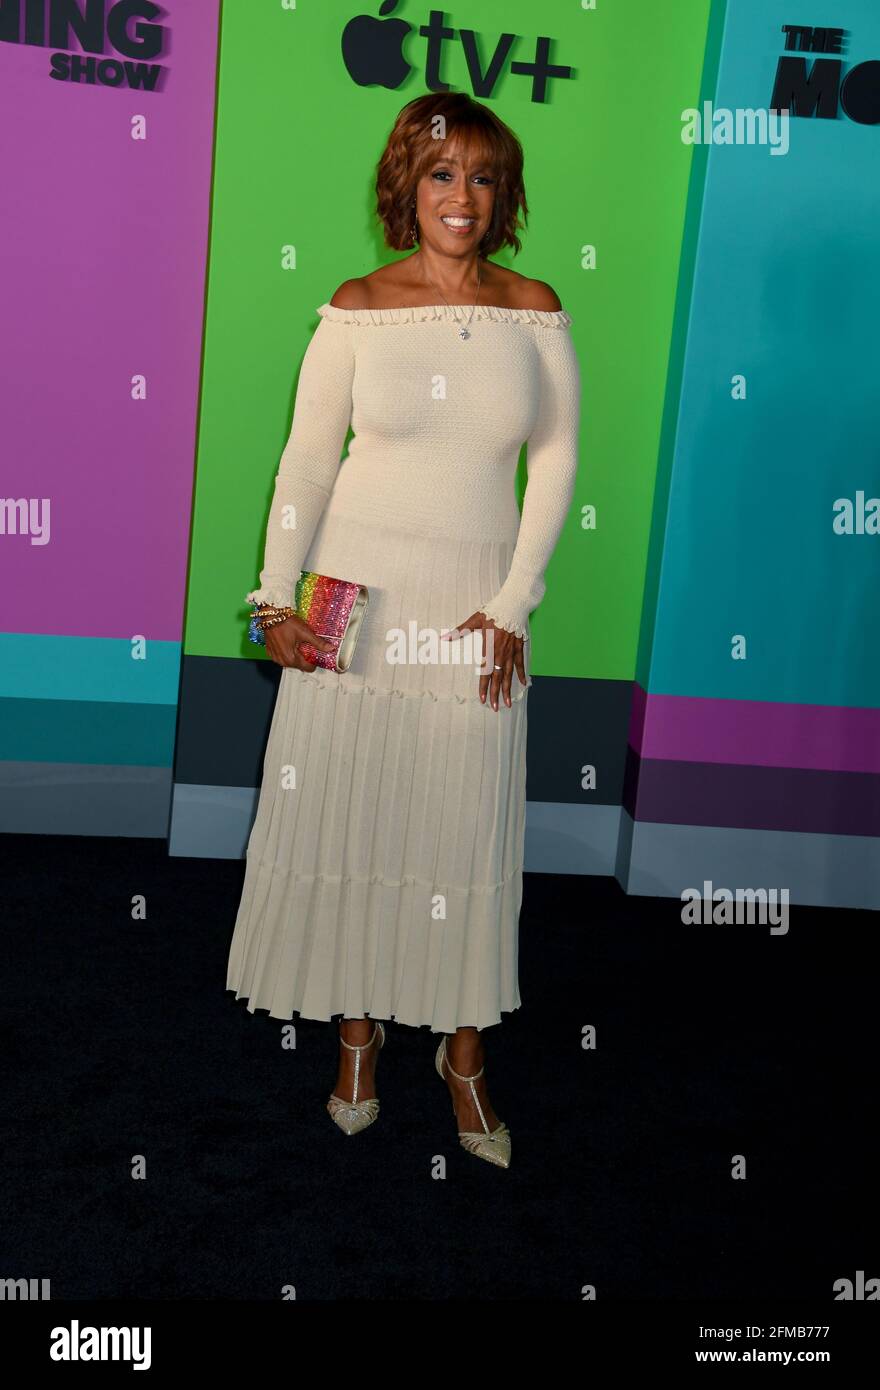 Gayle King arrives to The Morning Show New York Premiere by APPLE TV, held at Lincoln Center in New York City, Monday, October 28, 2019. Photo by Jennifer Graylock-Graylock.com 917-519-7666 Stock Photo